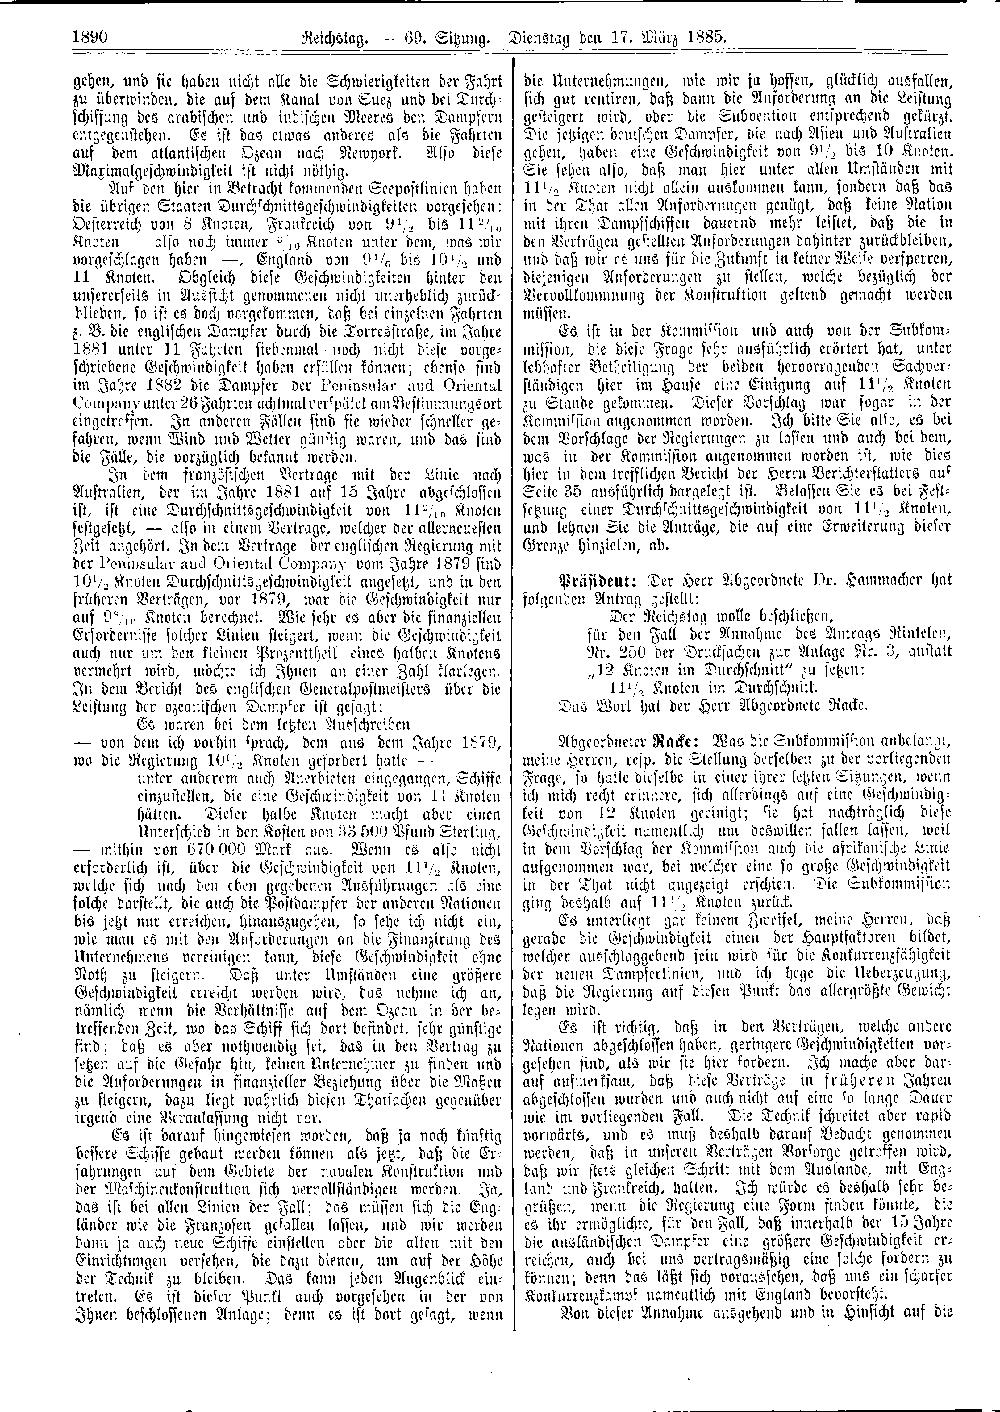 Scan of page 1890